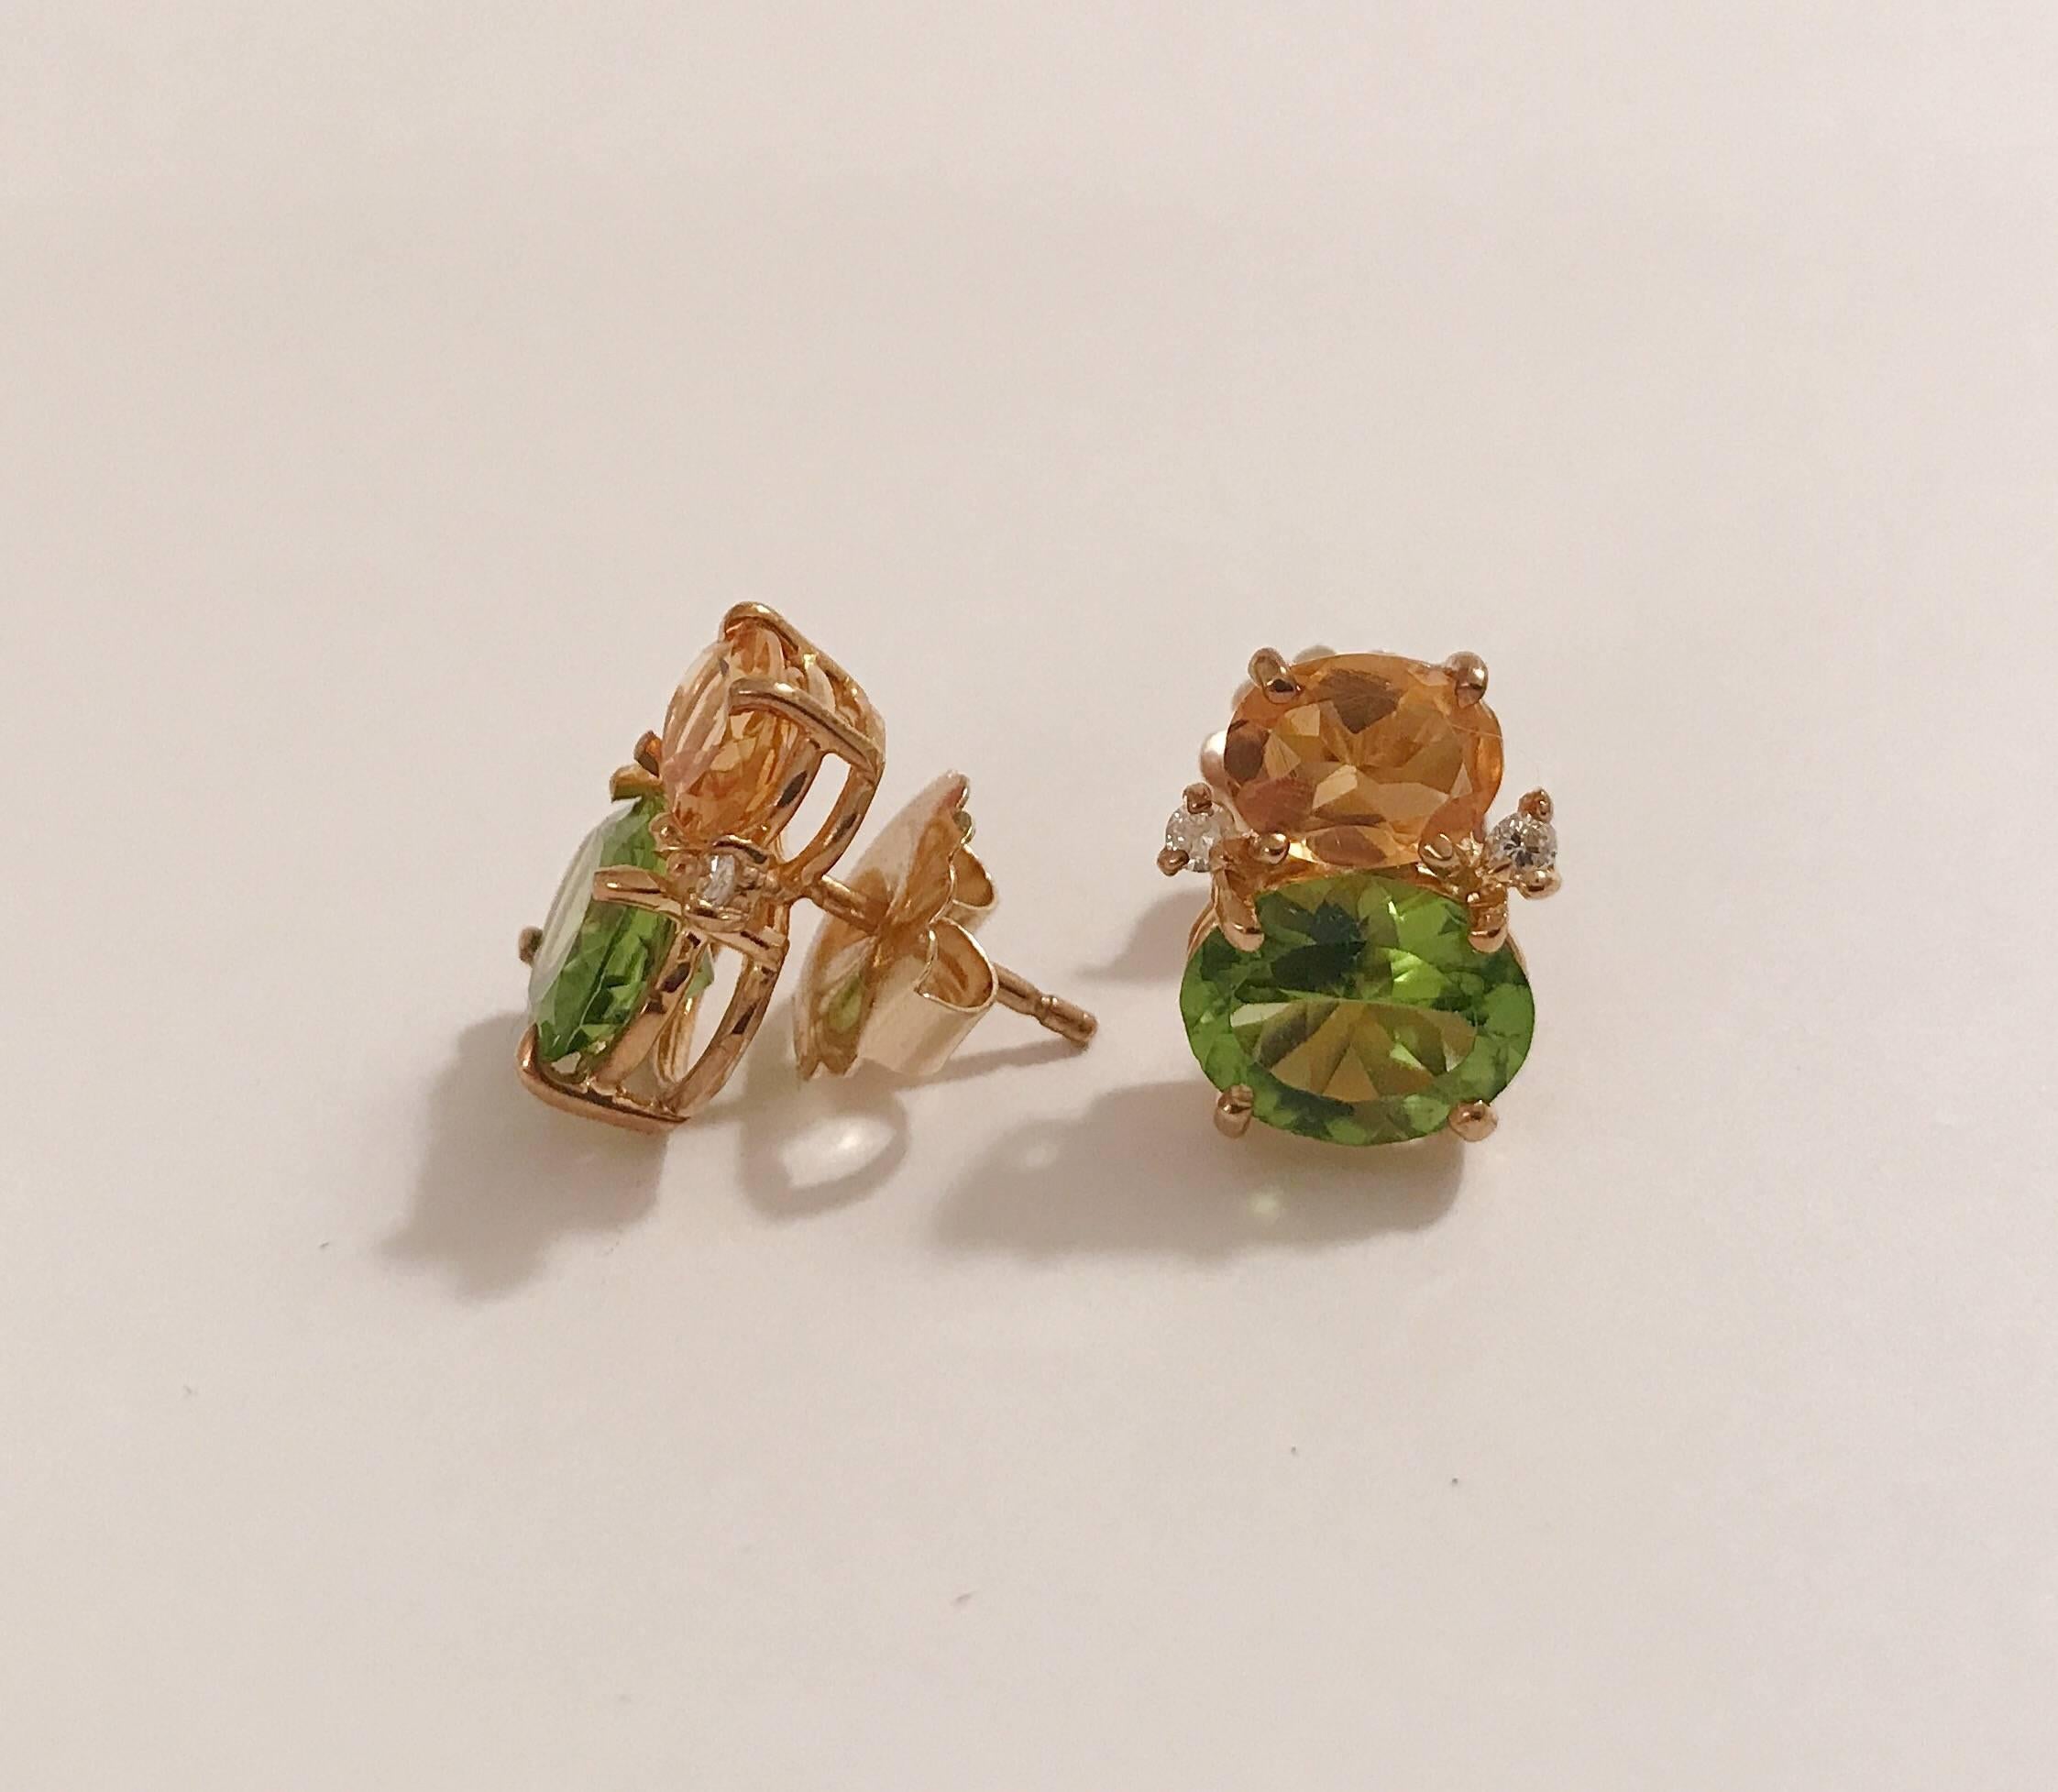 Mini 18kt Yellow Gold GUM DROP™ earrings with faceted Citrine (approximately 2 cts each), Faceted Peridot (approximately 3 cts each), and 4 diamonds weighing ~ 0.20 cts. 

Specifications:  : 5/8